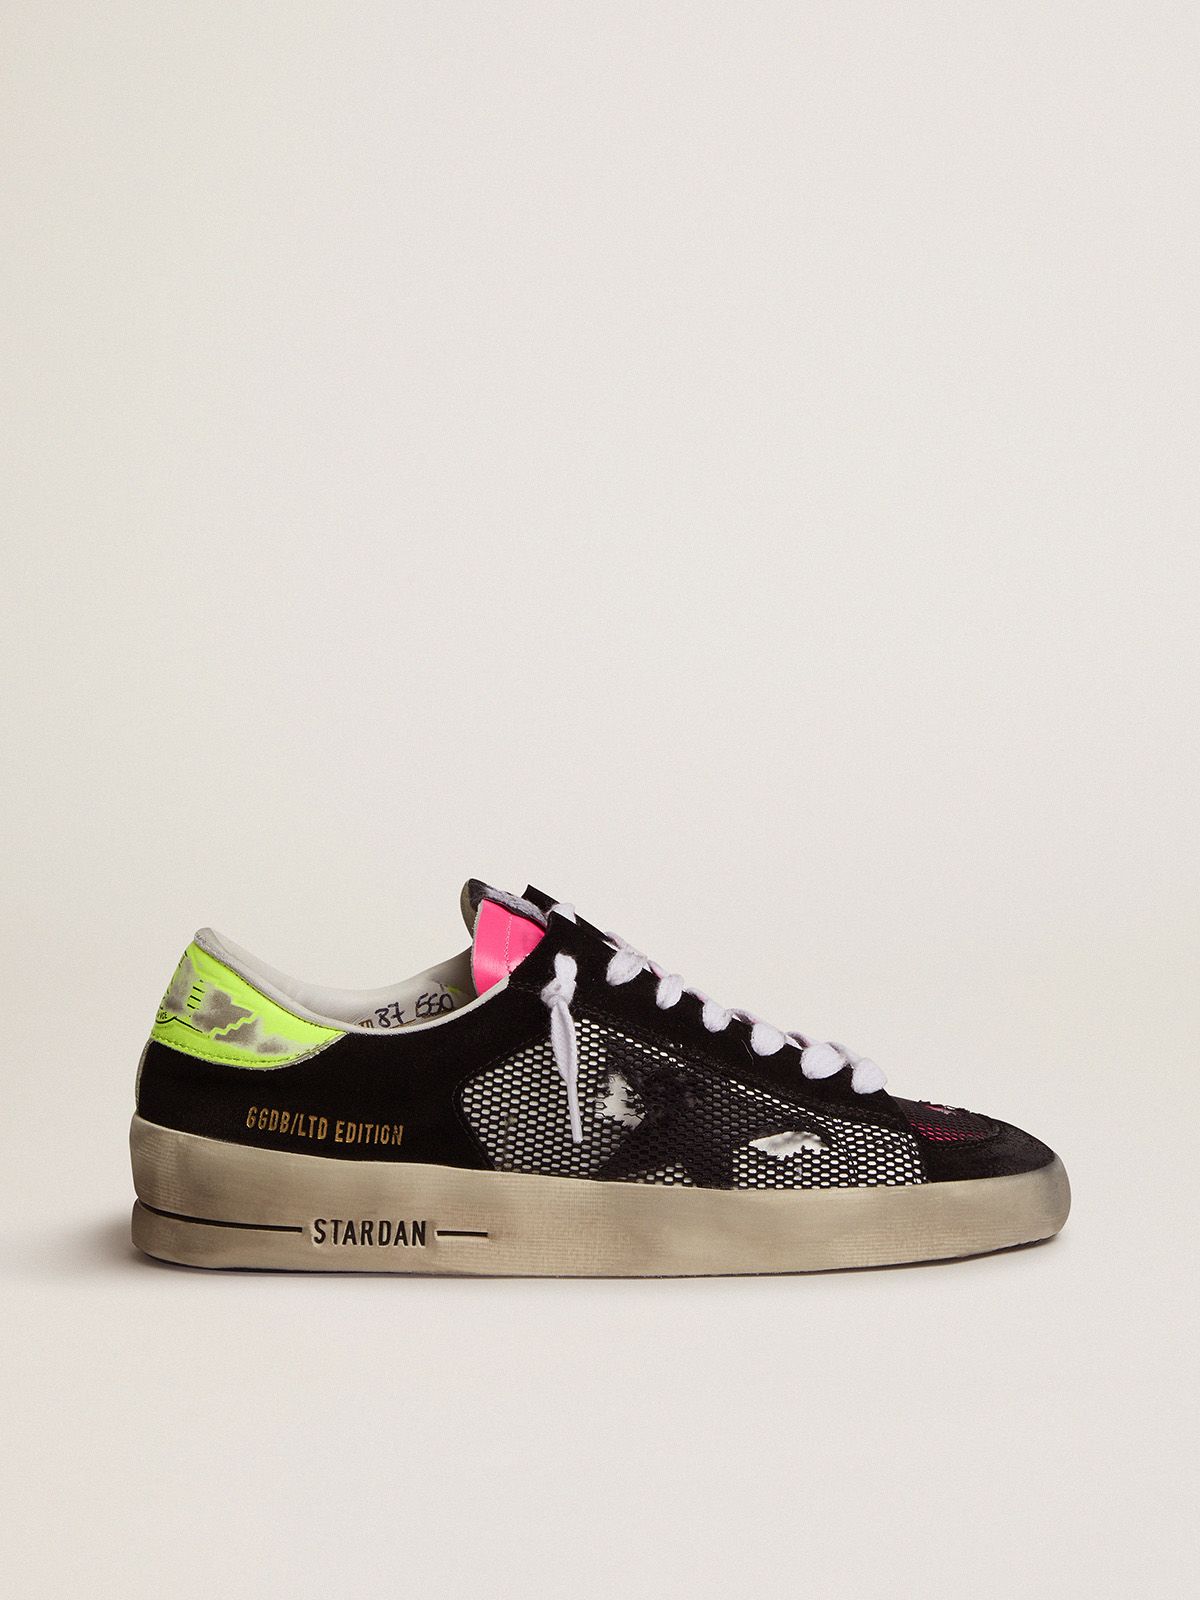 golden goose fuchsia and in Limited sneakers Edition yellow Stardan Women’s